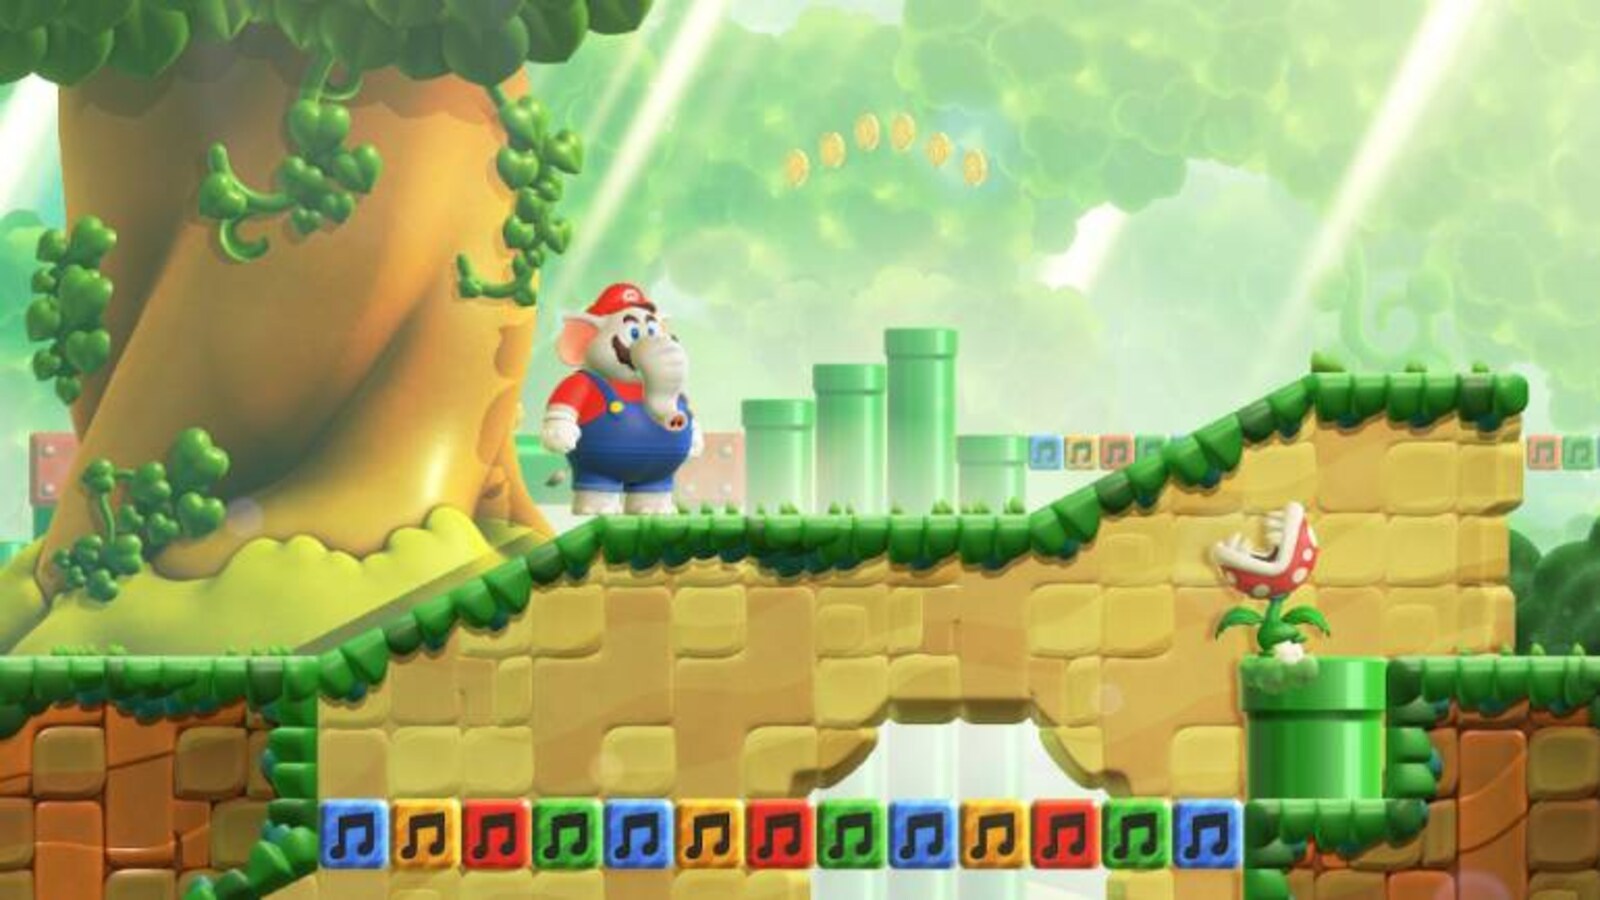 Super Mario Bros. Wonder Continues to Shutter Fan Favorite Characters